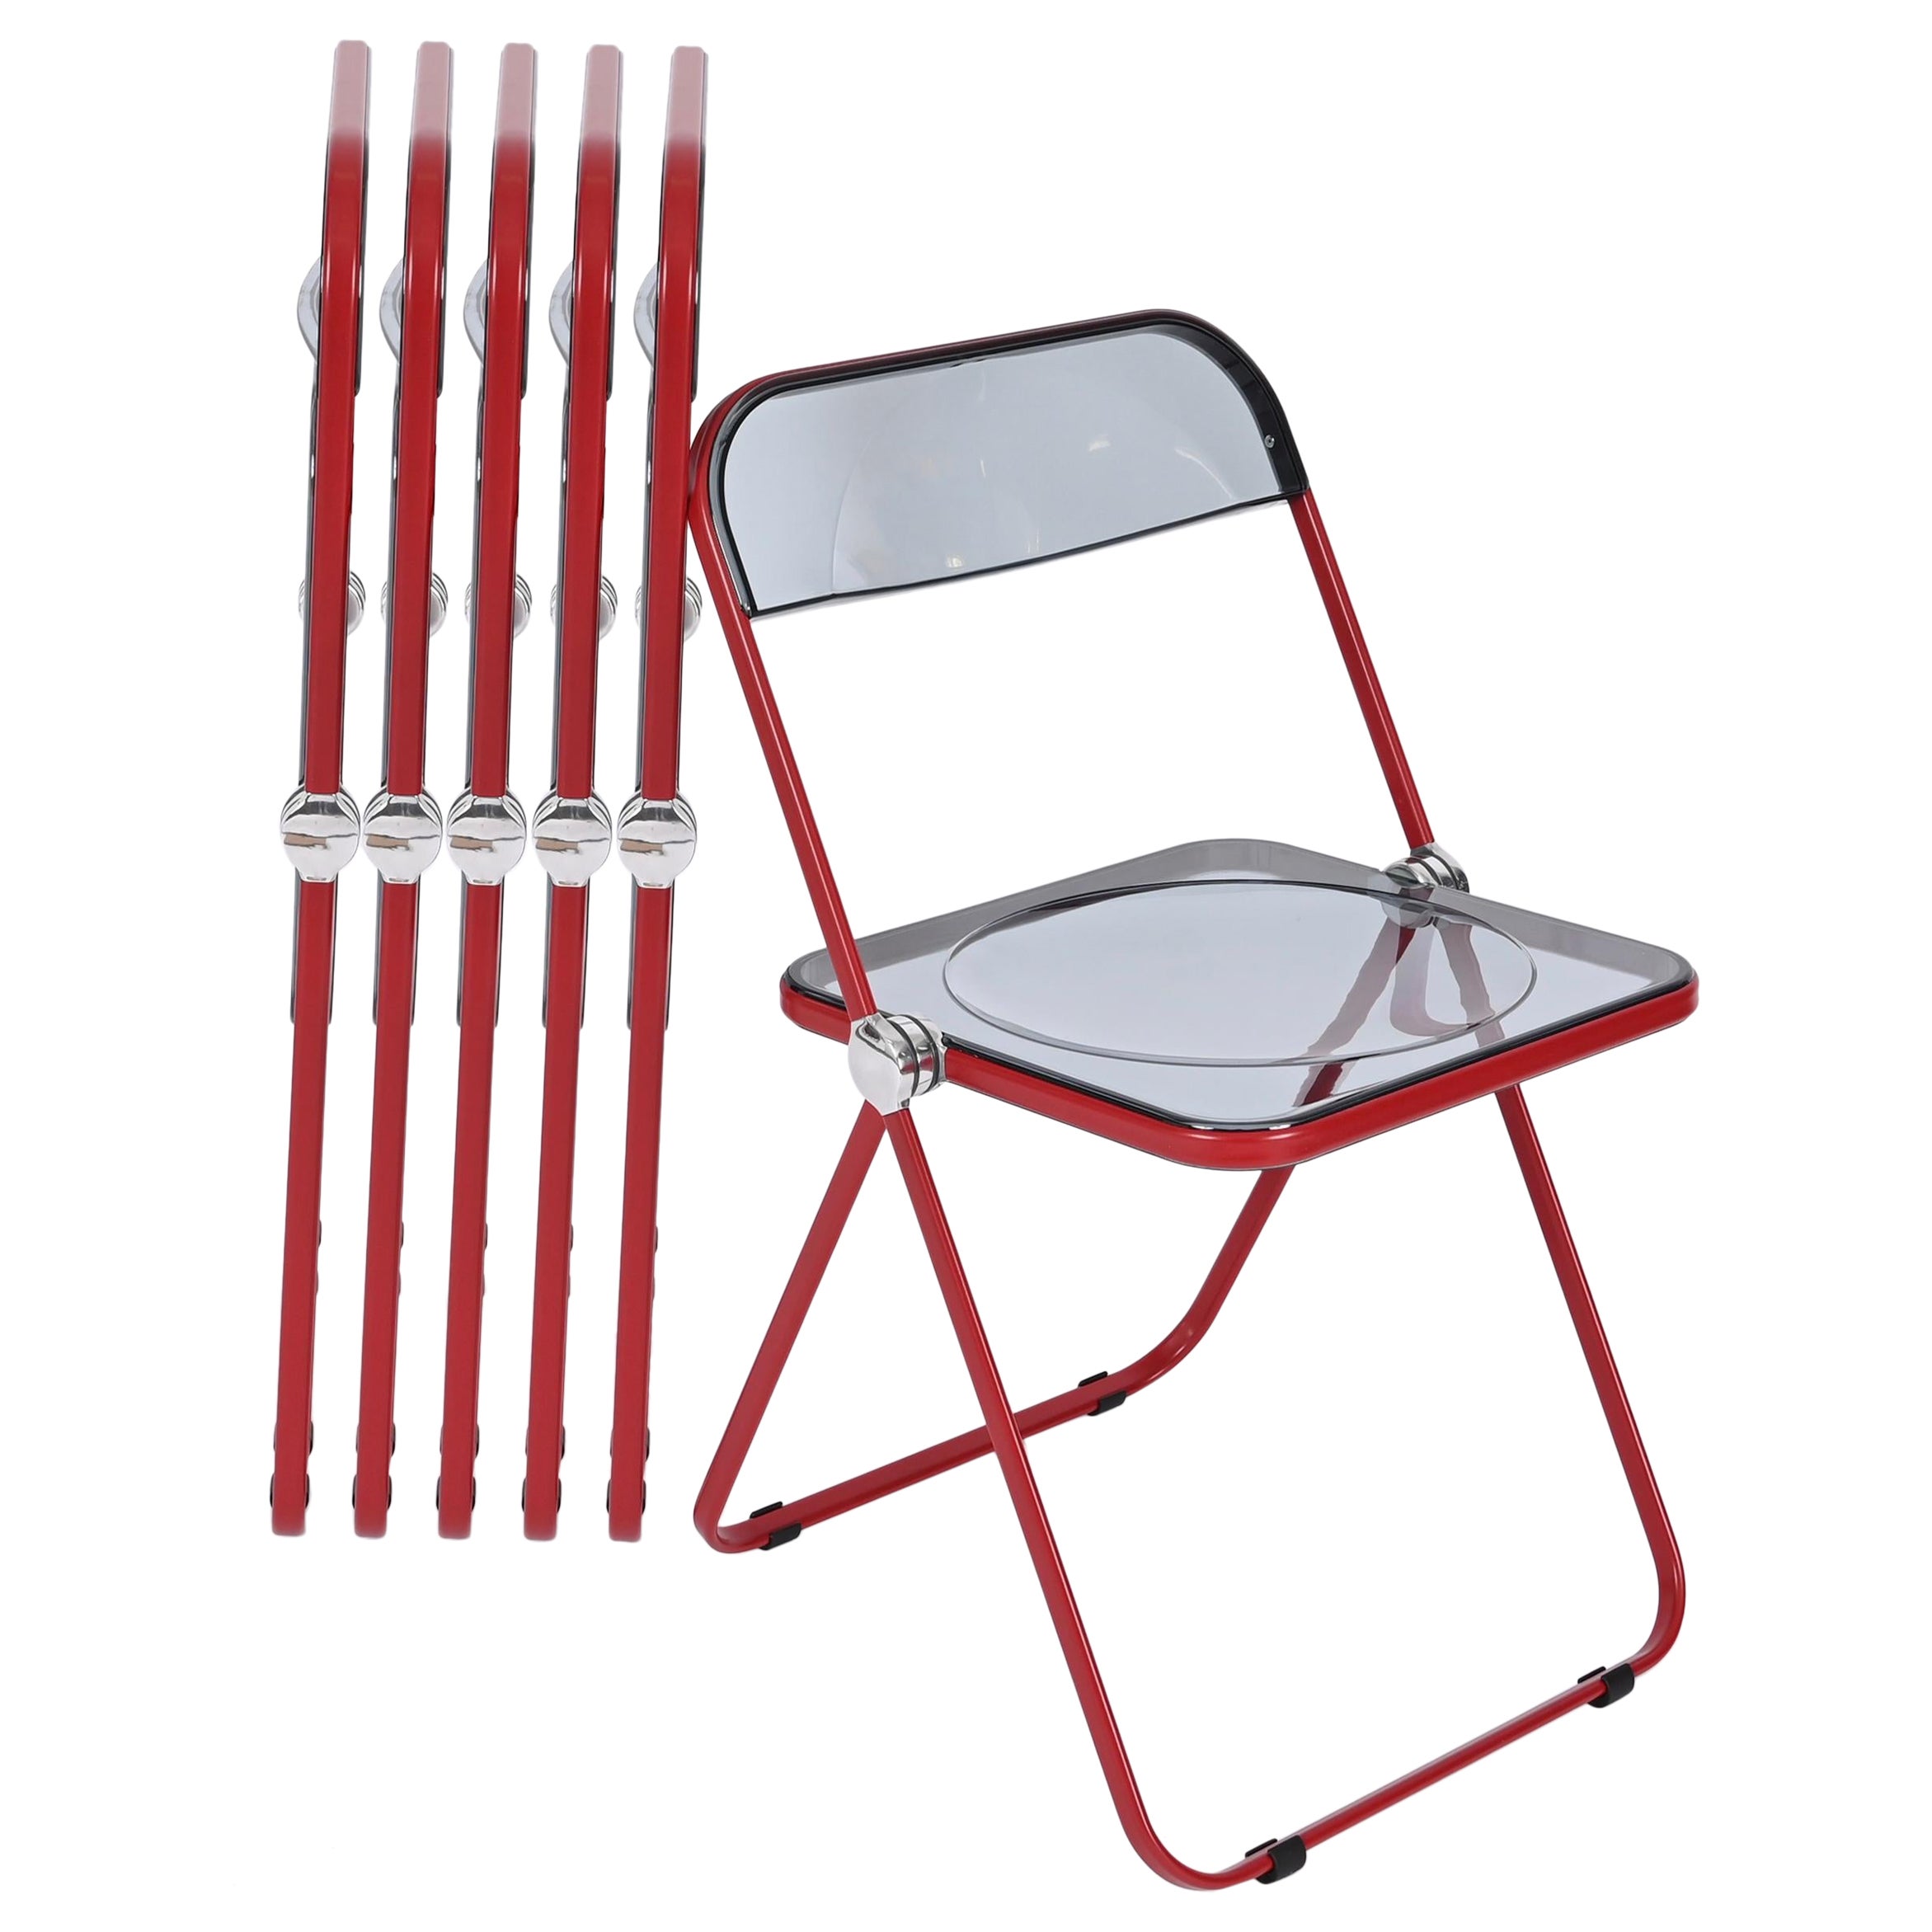 Set of 6 Red and Smoked Lucite Plia folding chairs by Piretti for Castelli Italy